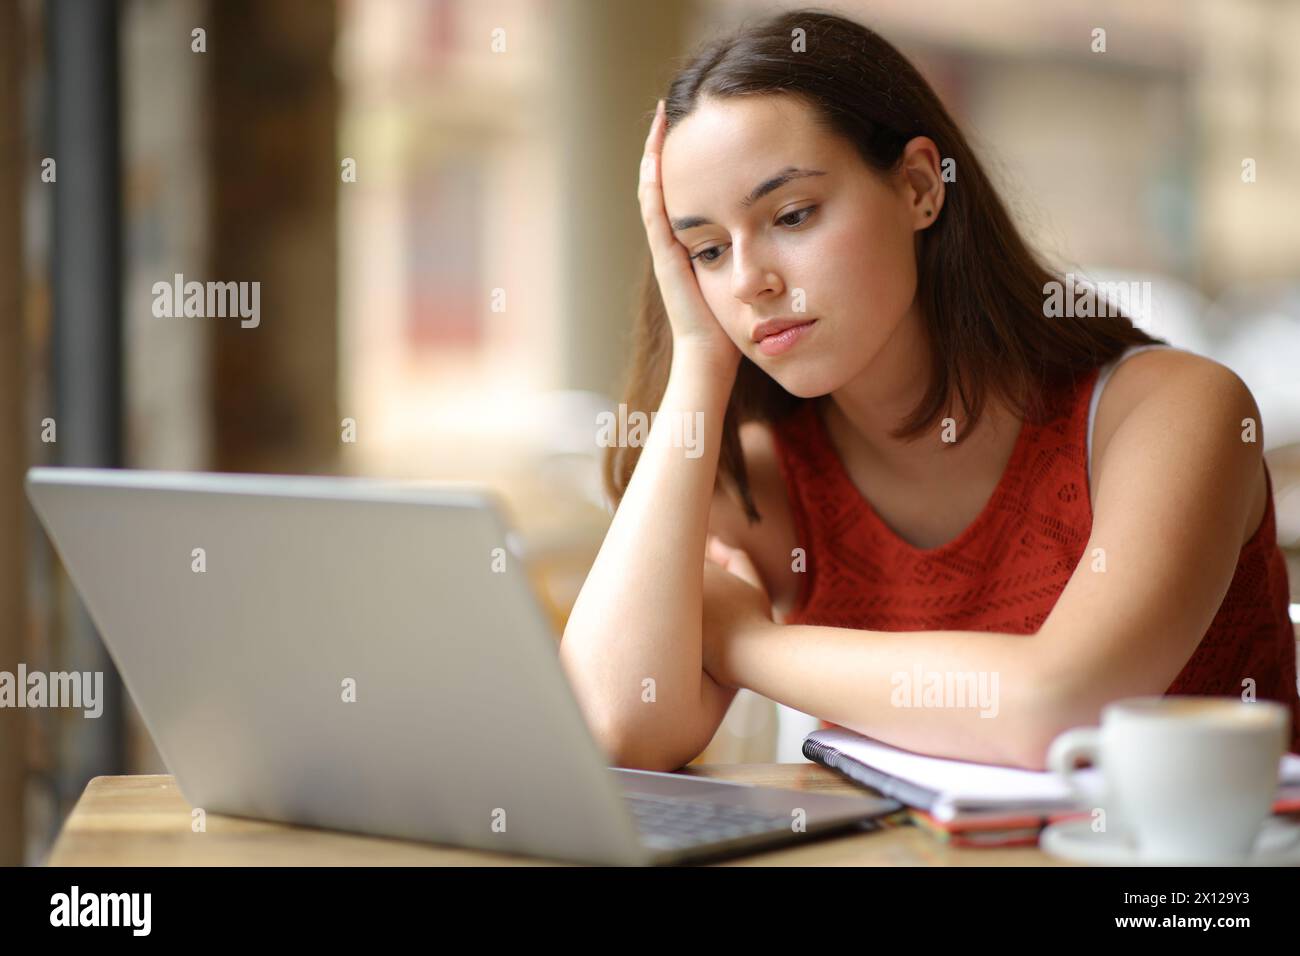 Apathetic student watching online content on laptop in a coffee shop terrace Stock Photo